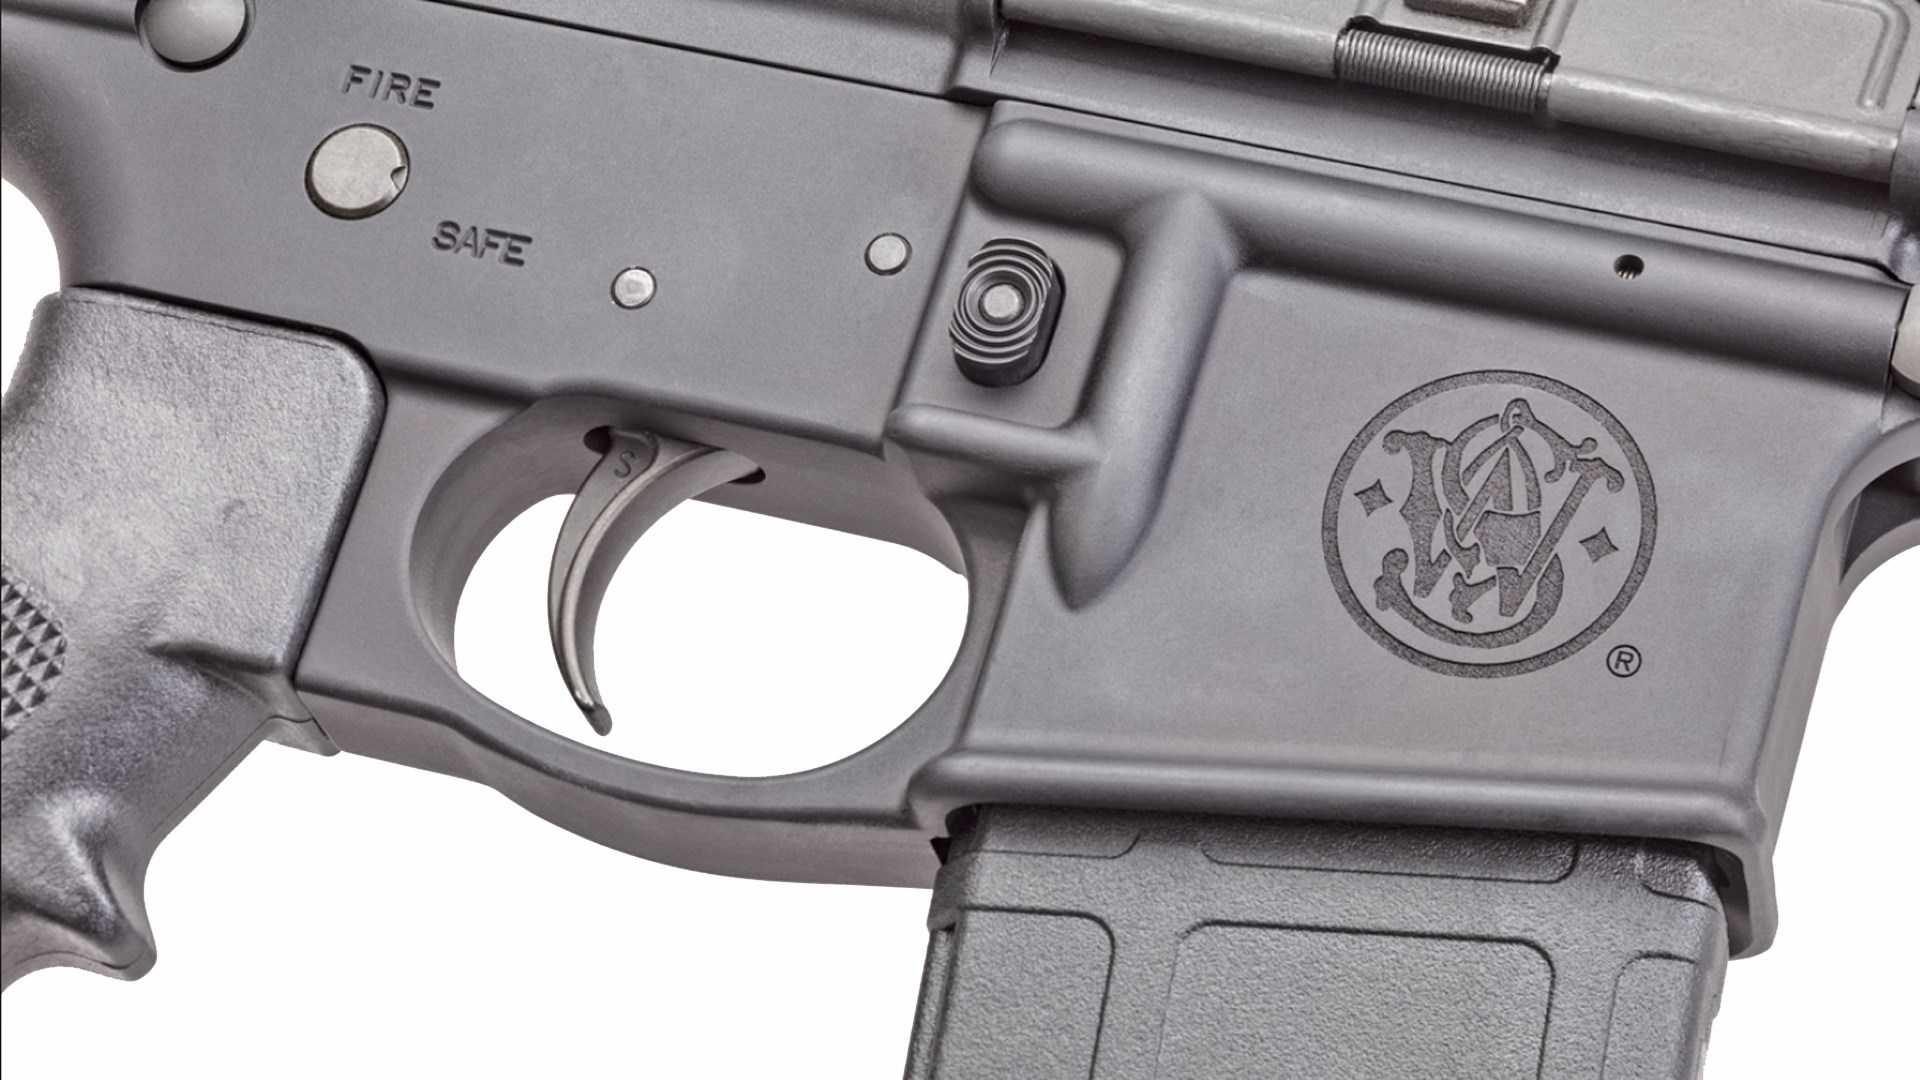 Right side of the M&P15 Sport III rifle receiver.